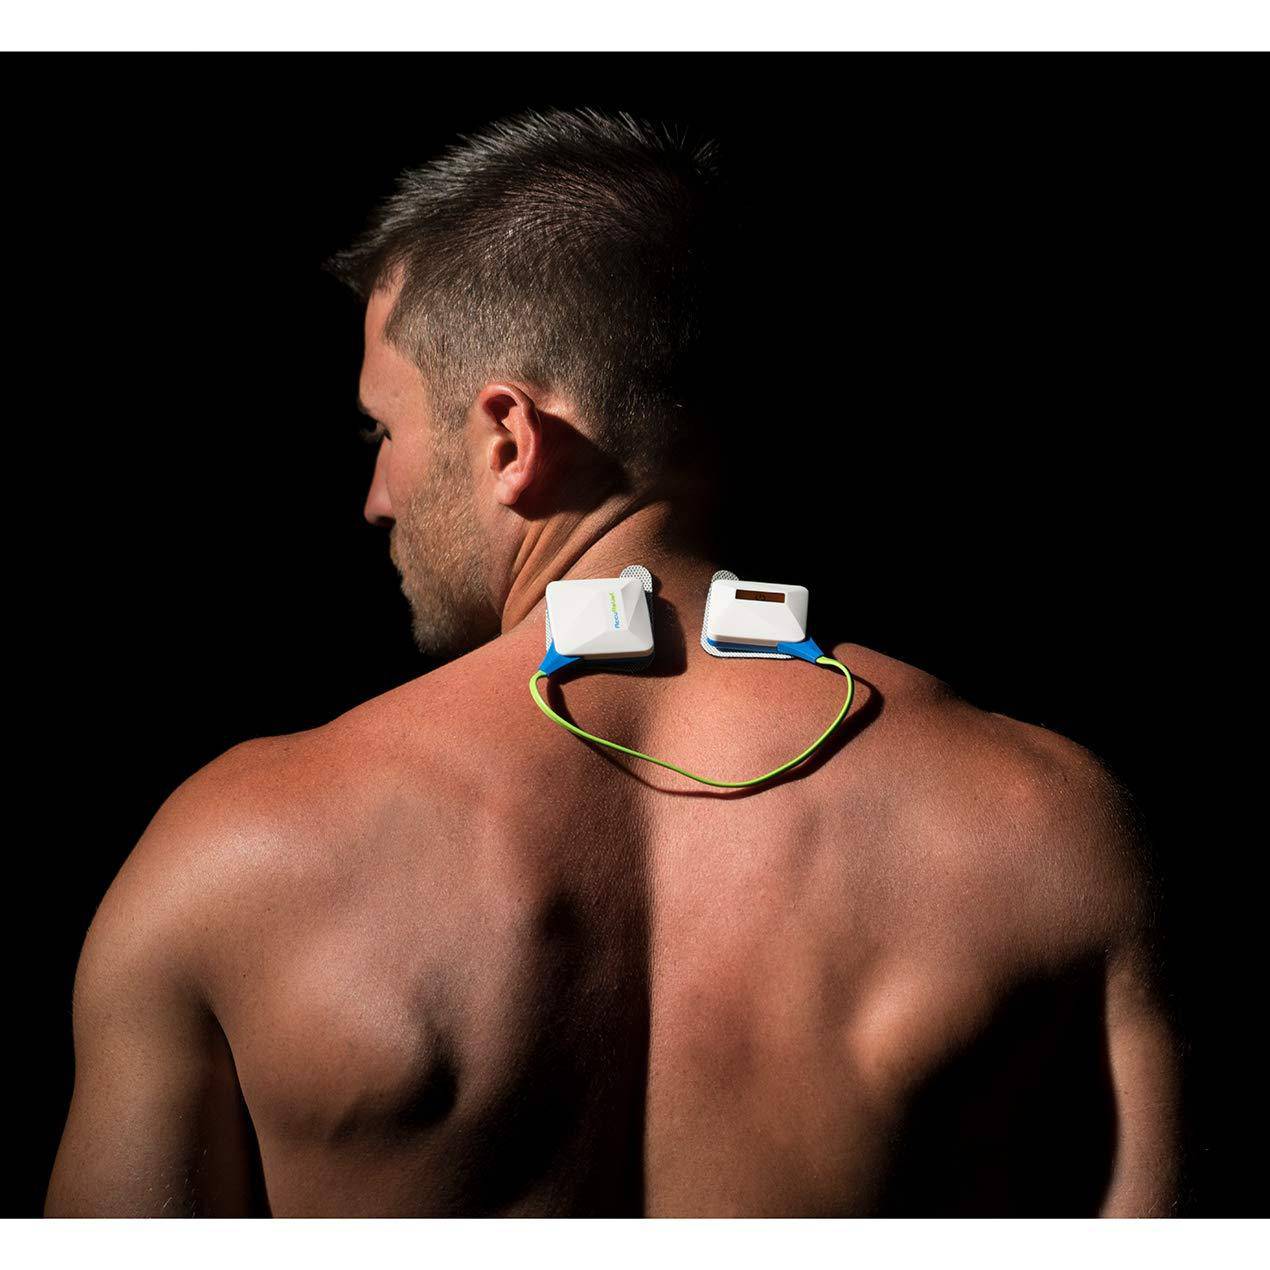 Male with Acute Neck Pain, Electrodes To Tens Unit Stock Image - Image of  killer, male: 12641955